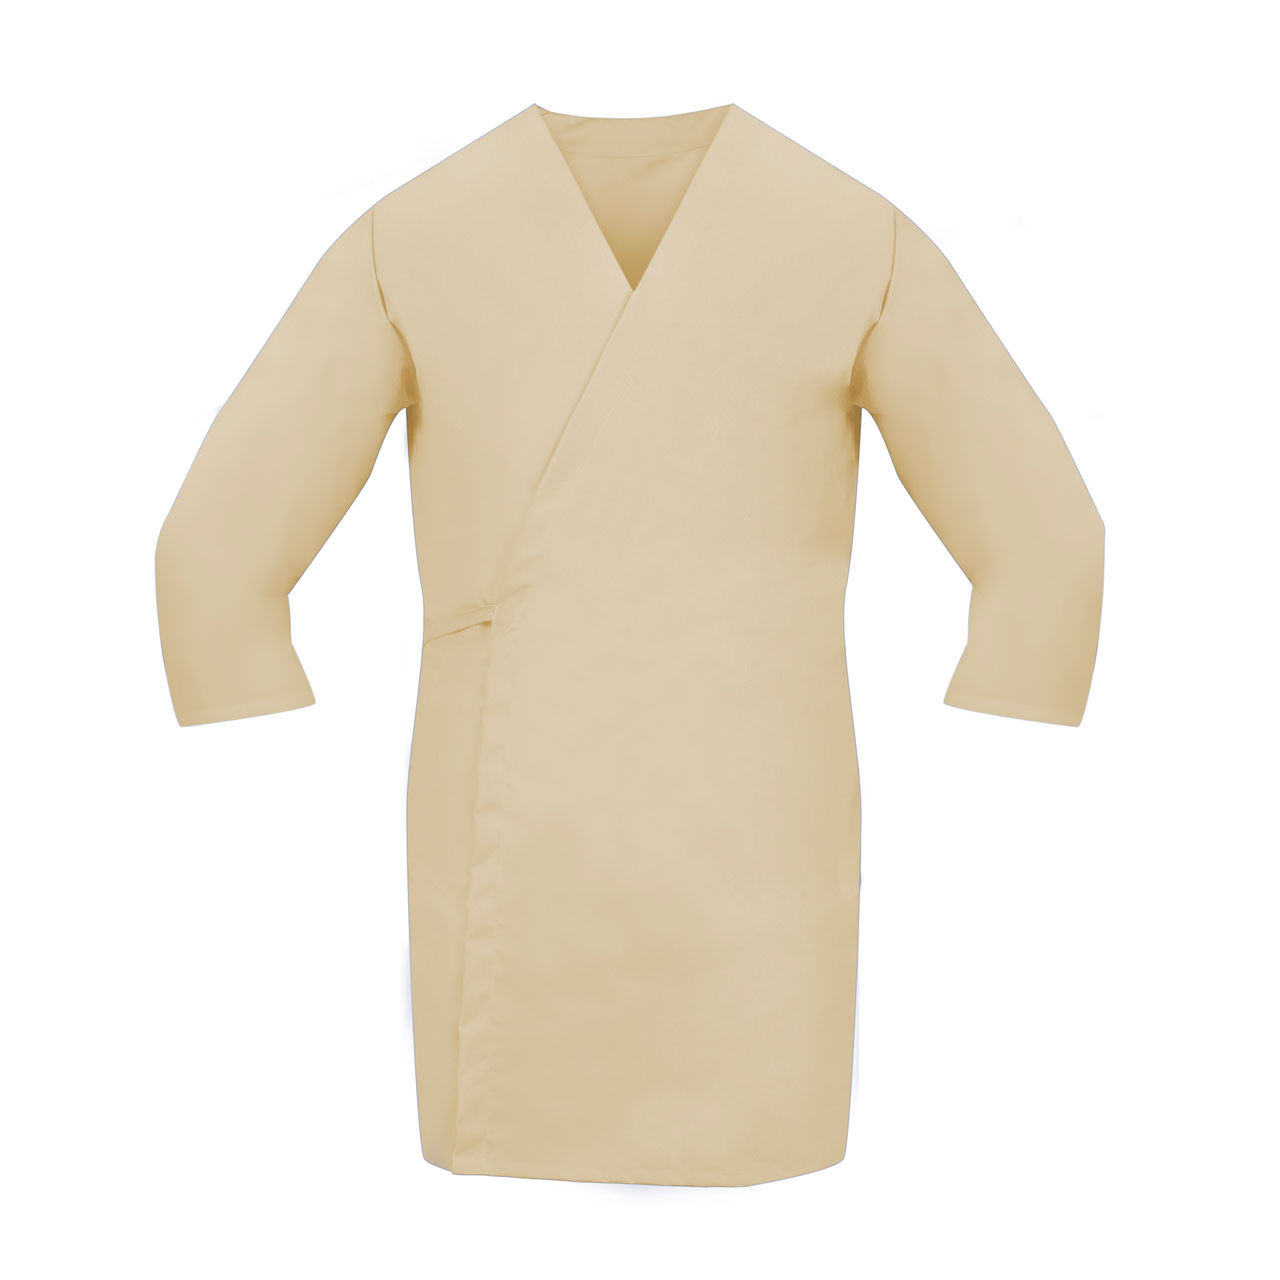 What color are the Tan Smock Wraps?